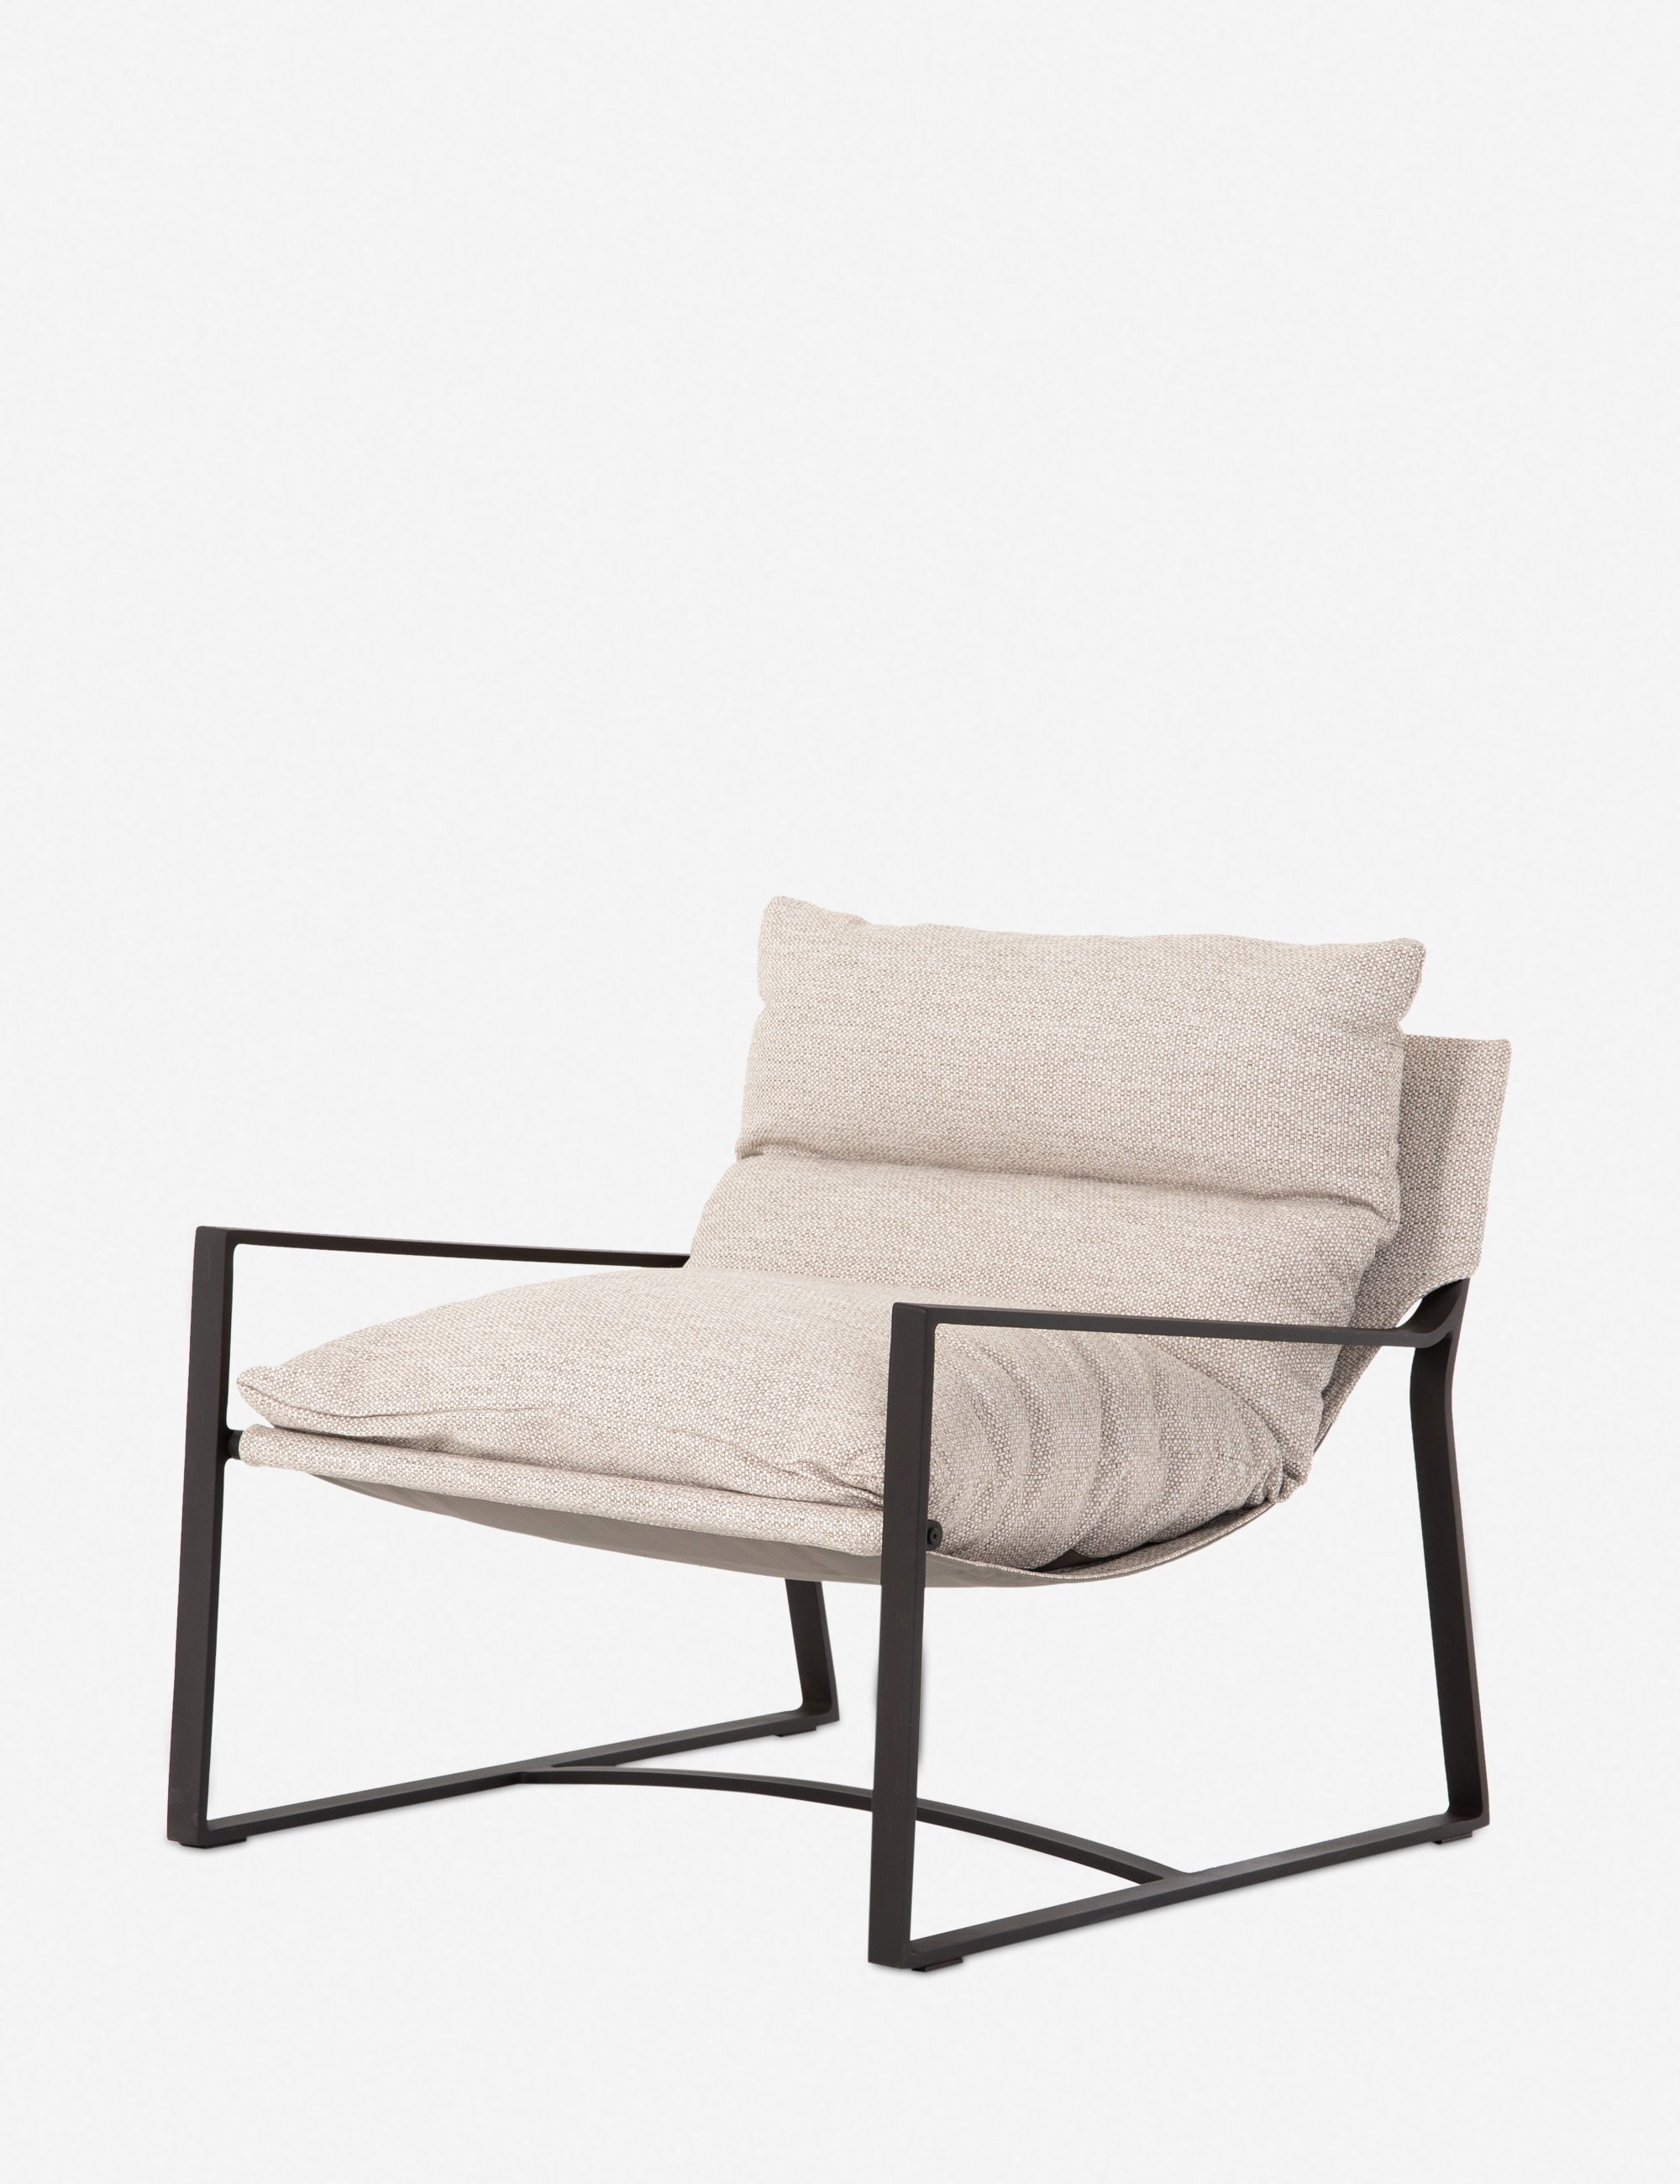 Pali Outdoor Accent Chair - Image 0